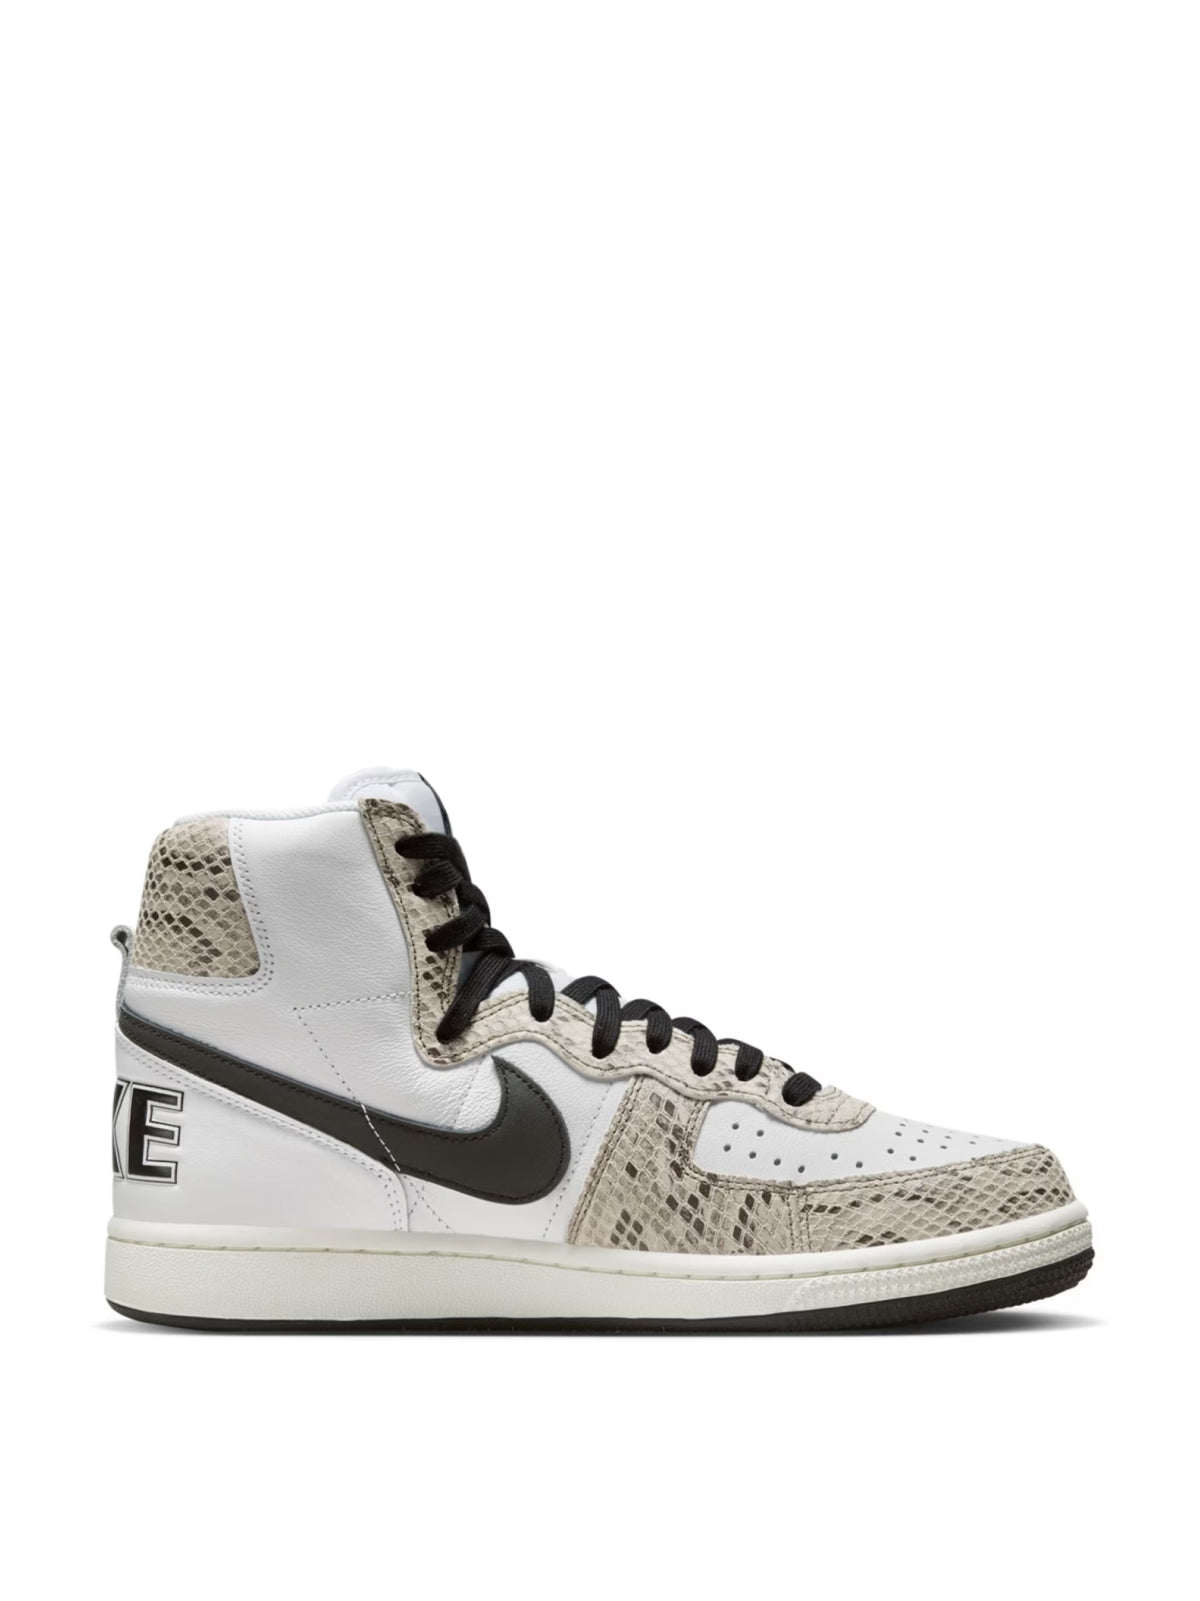 Nike-OUTLET-SALE-Terminator High Cocoa Snake Sneakers-ARCHIVIST